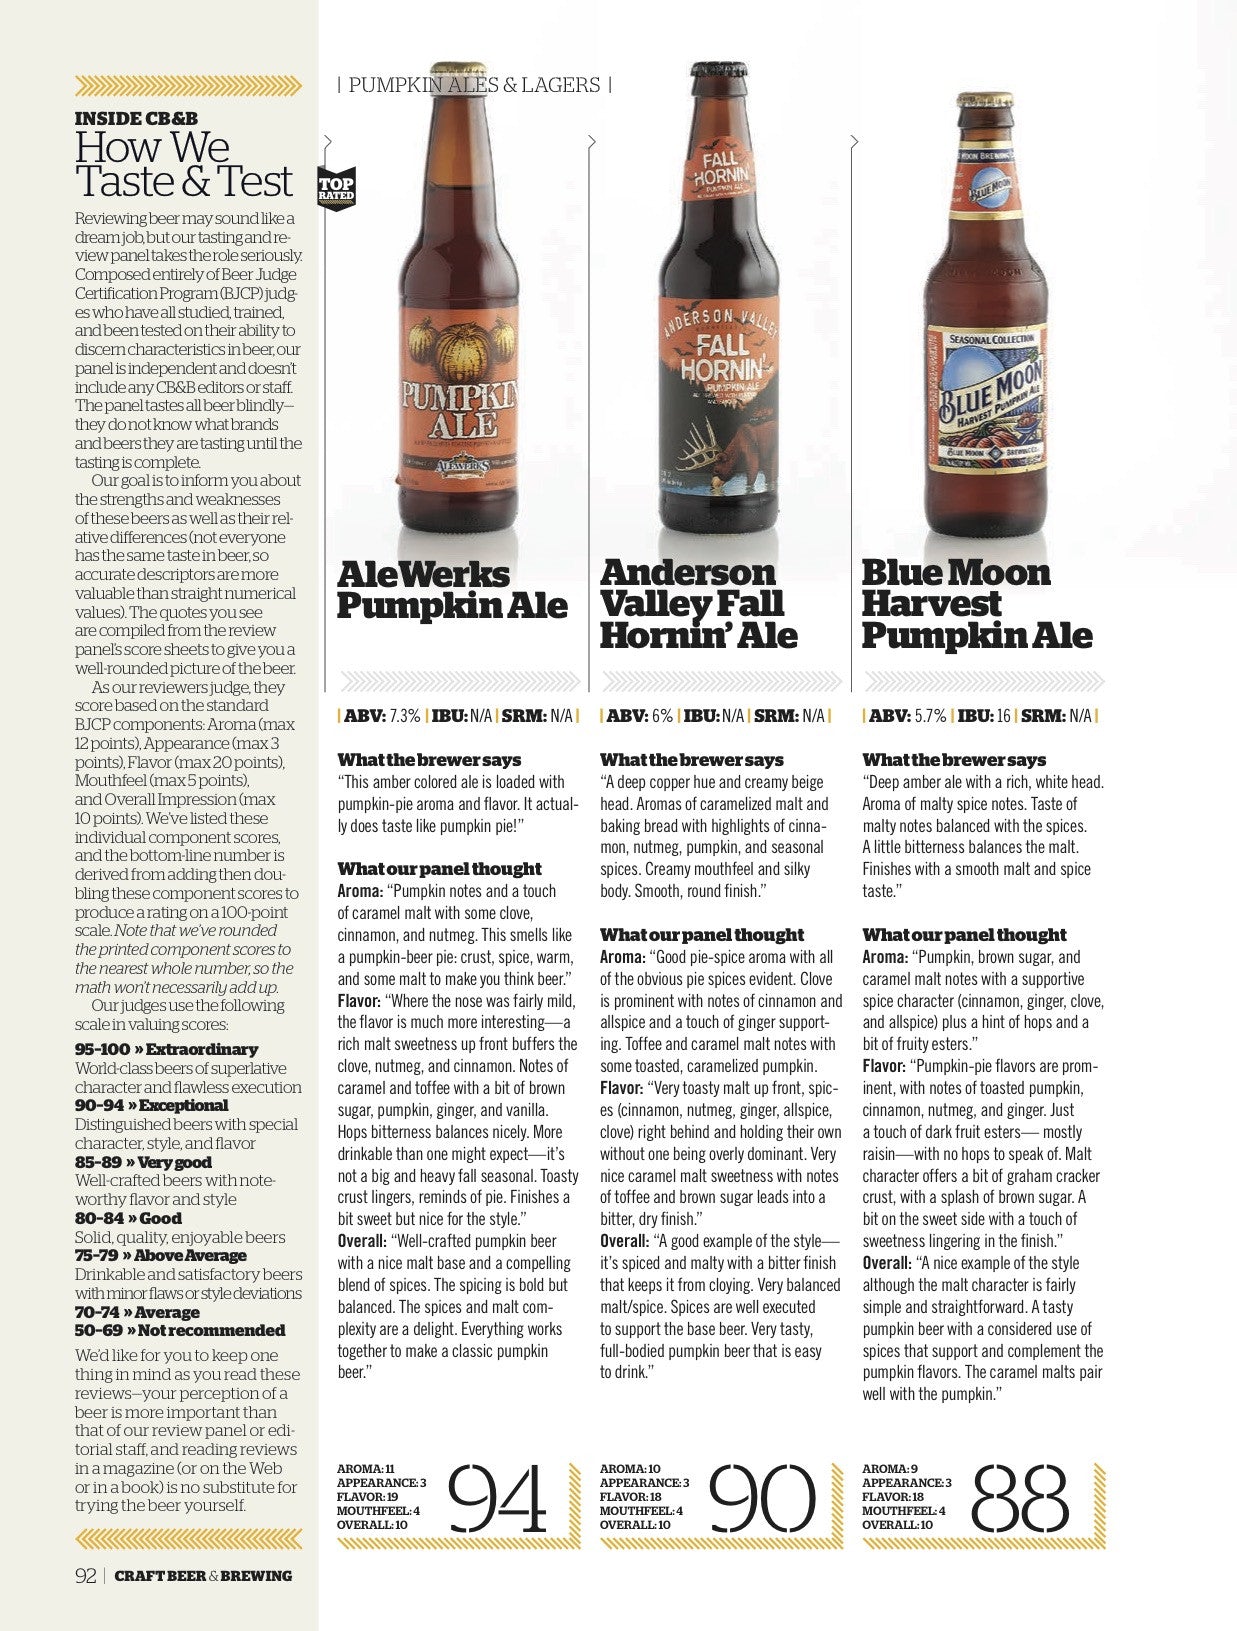 August-September 2015 Issue (Fresh Hops) - Craft Beer & Brewing